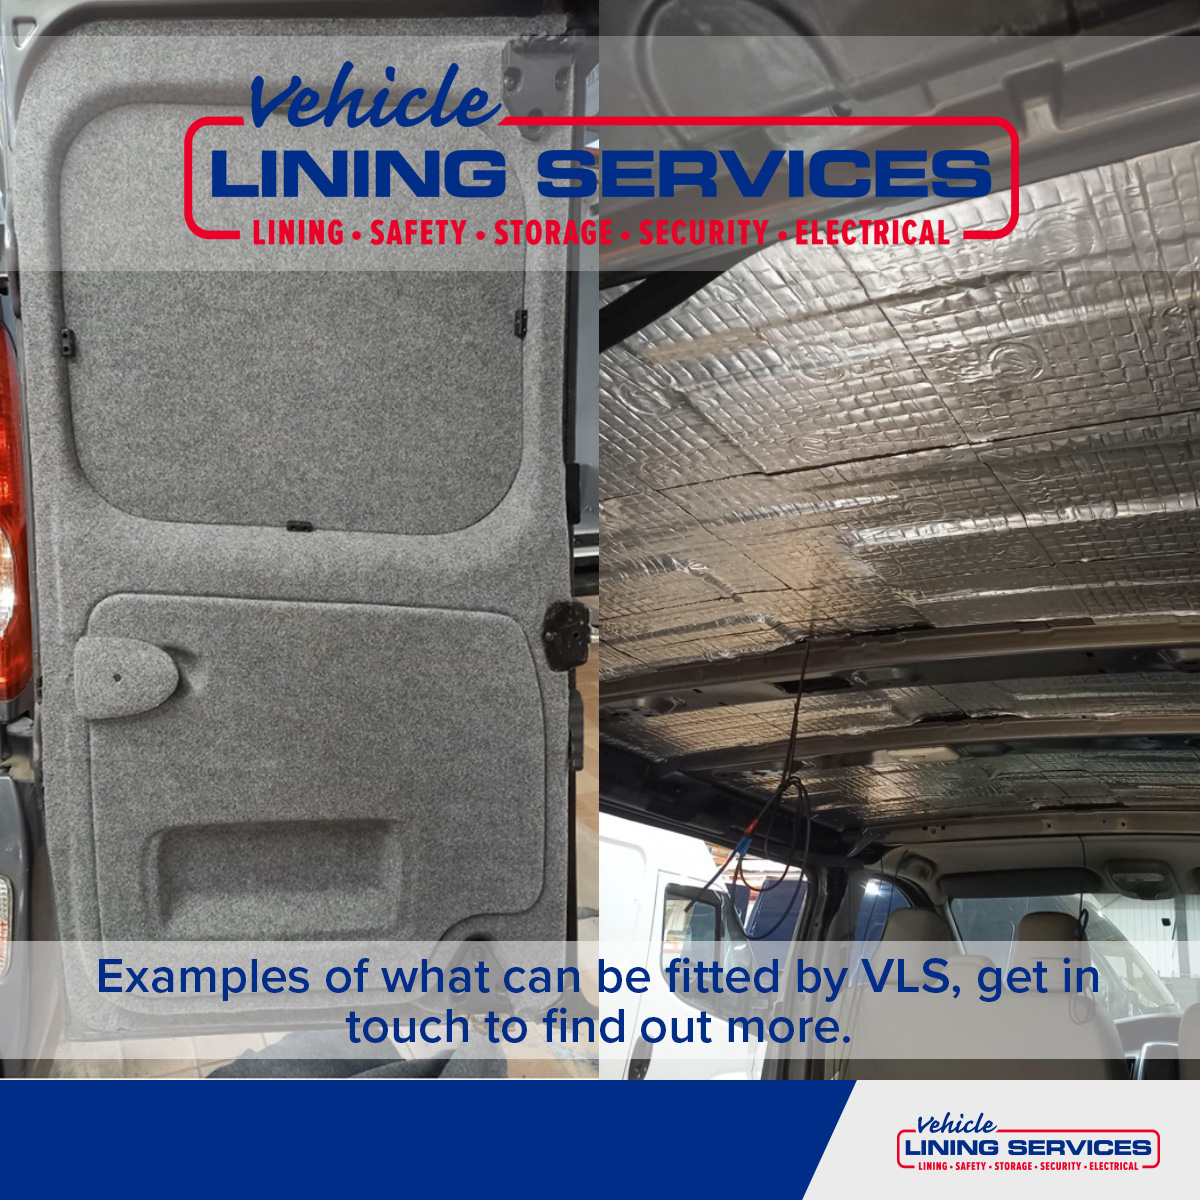 Some examples of how VLS can help you enhance your vehicle.
Call our sales team on 0121 503 8311 to find out more.

#vehicleliningservices #truck #van #plylining #fitting #conversions #vanconversion #automotive #commercialvehicles #commercialvehicle #fleet #vehicles #storage